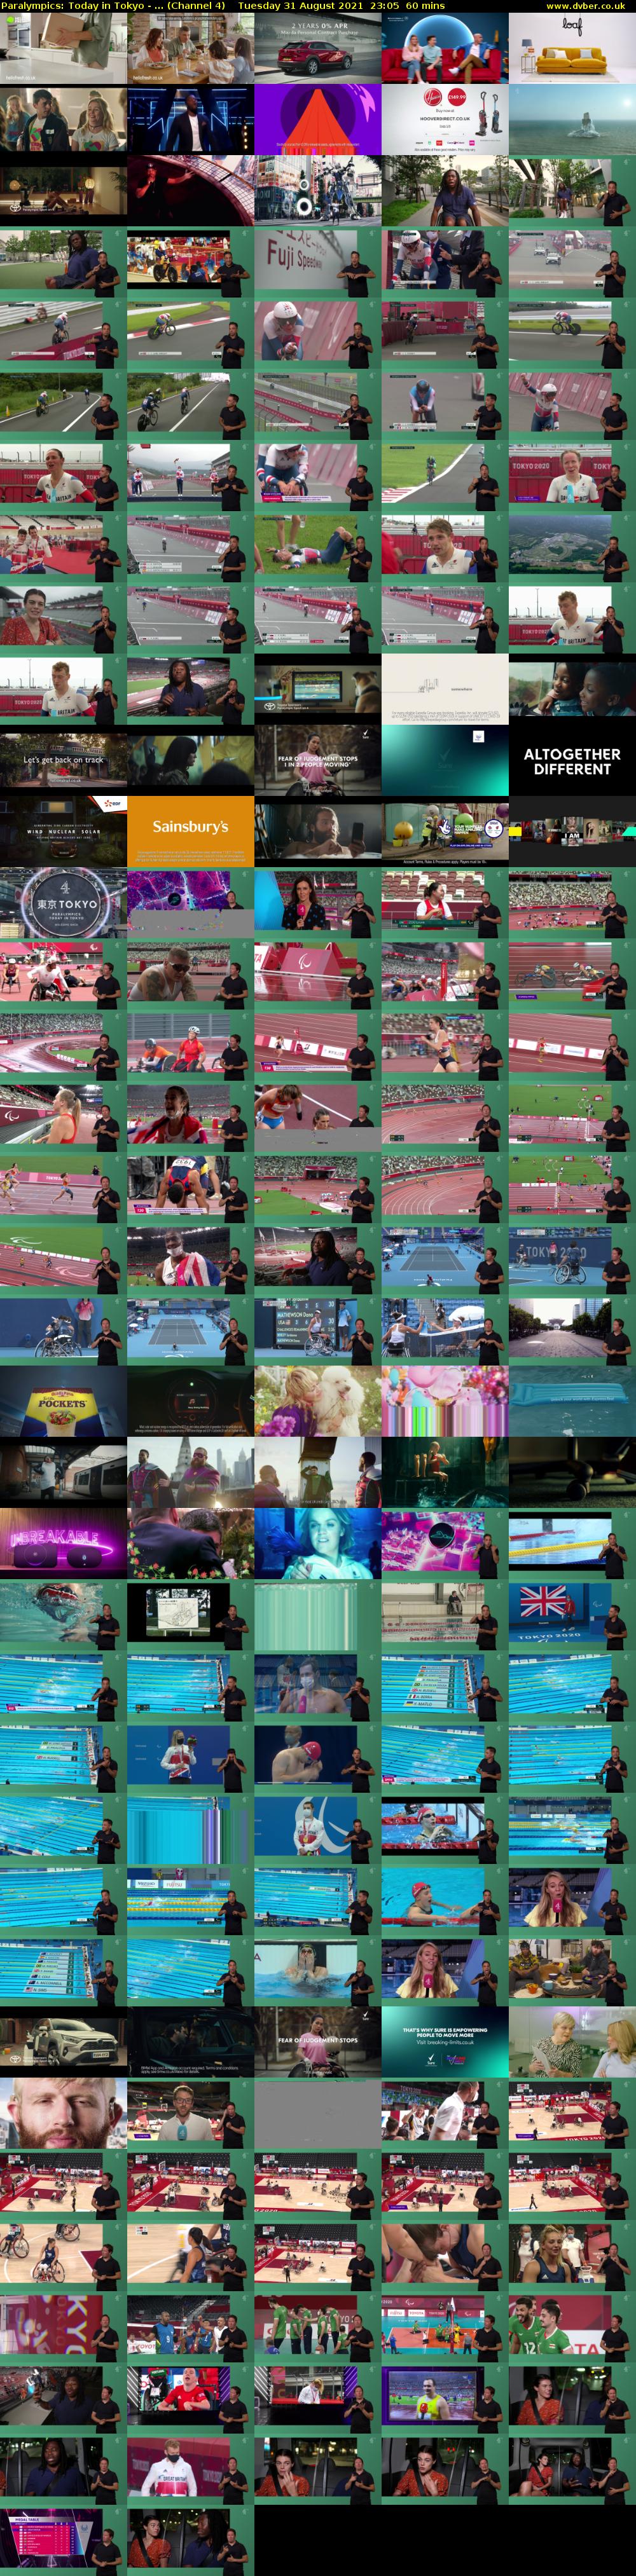 Paralympics: Today in Tokyo - ... (Channel 4) Tuesday 31 August 2021 23:05 - 00:05